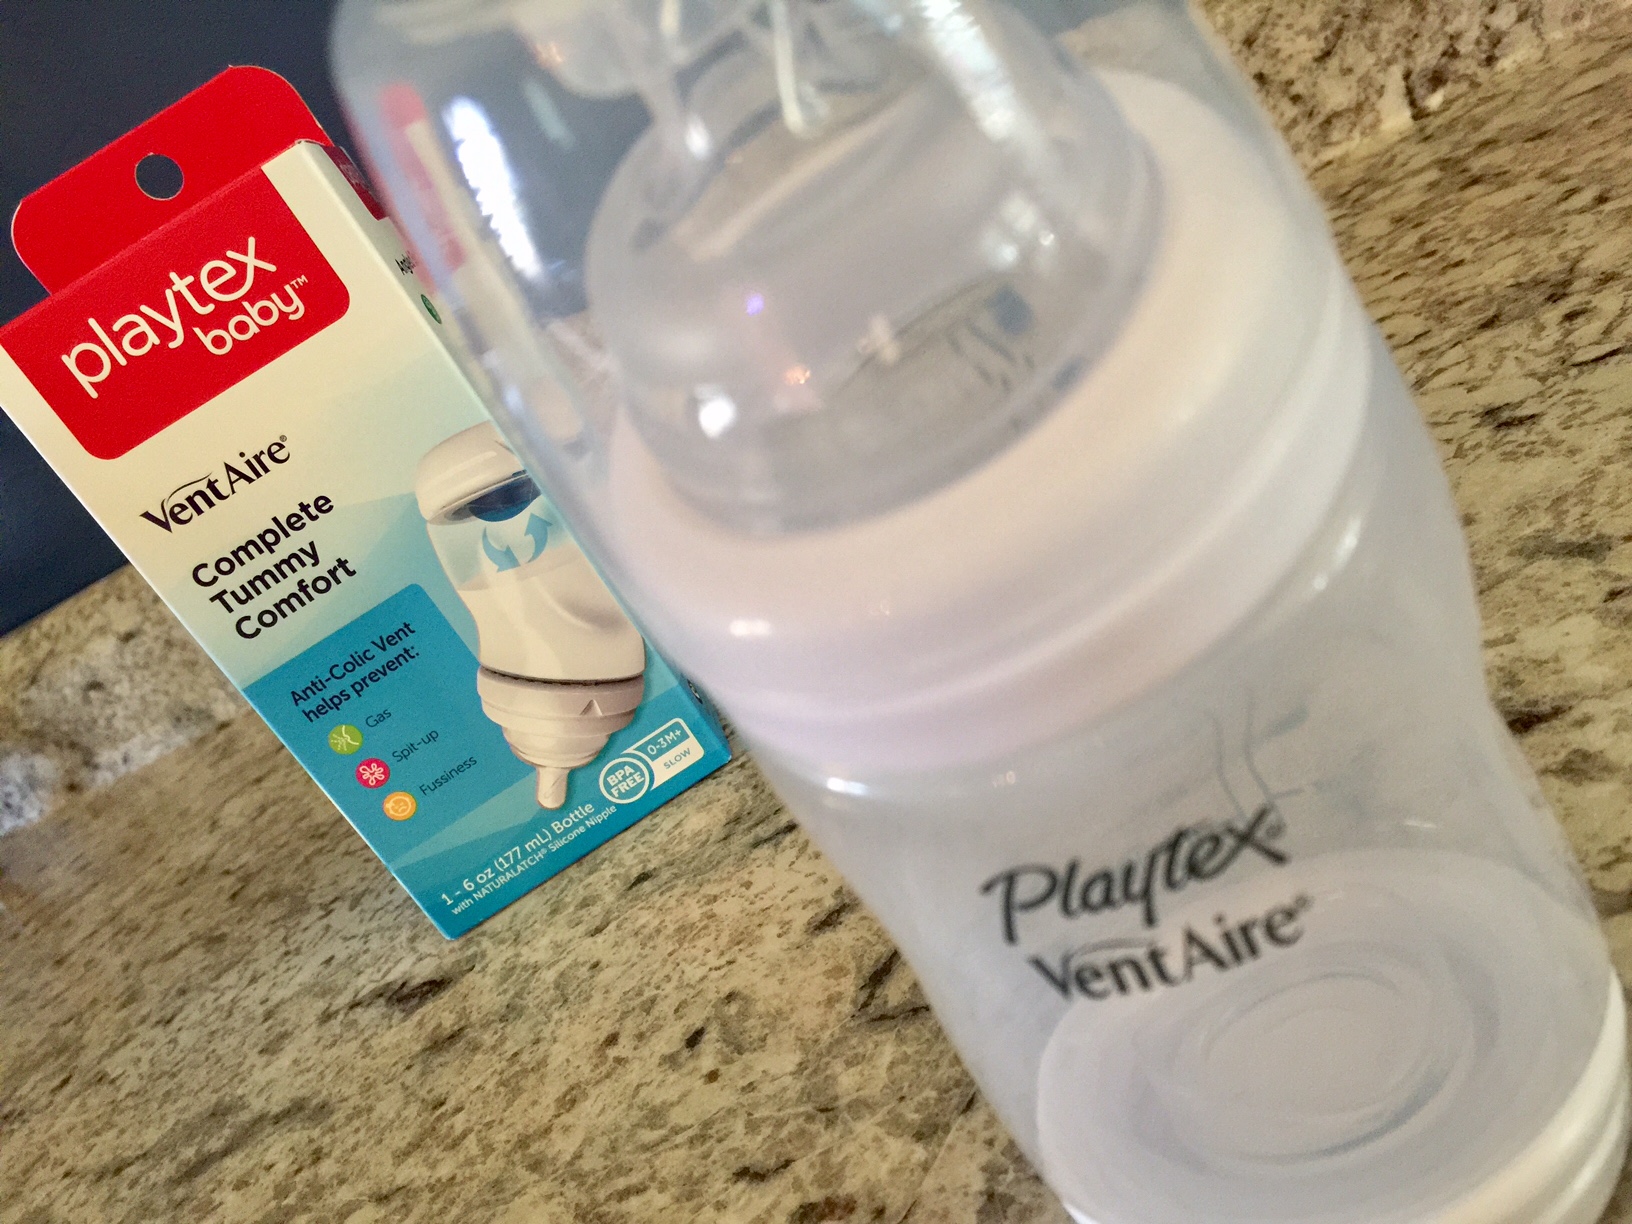 Playtex Baby Bottles make for better beginnings | BPA Free Baby Bottles | Traveling with a baby tips | travel tips | acupful.com | family travel | #FirstsMadeEasy